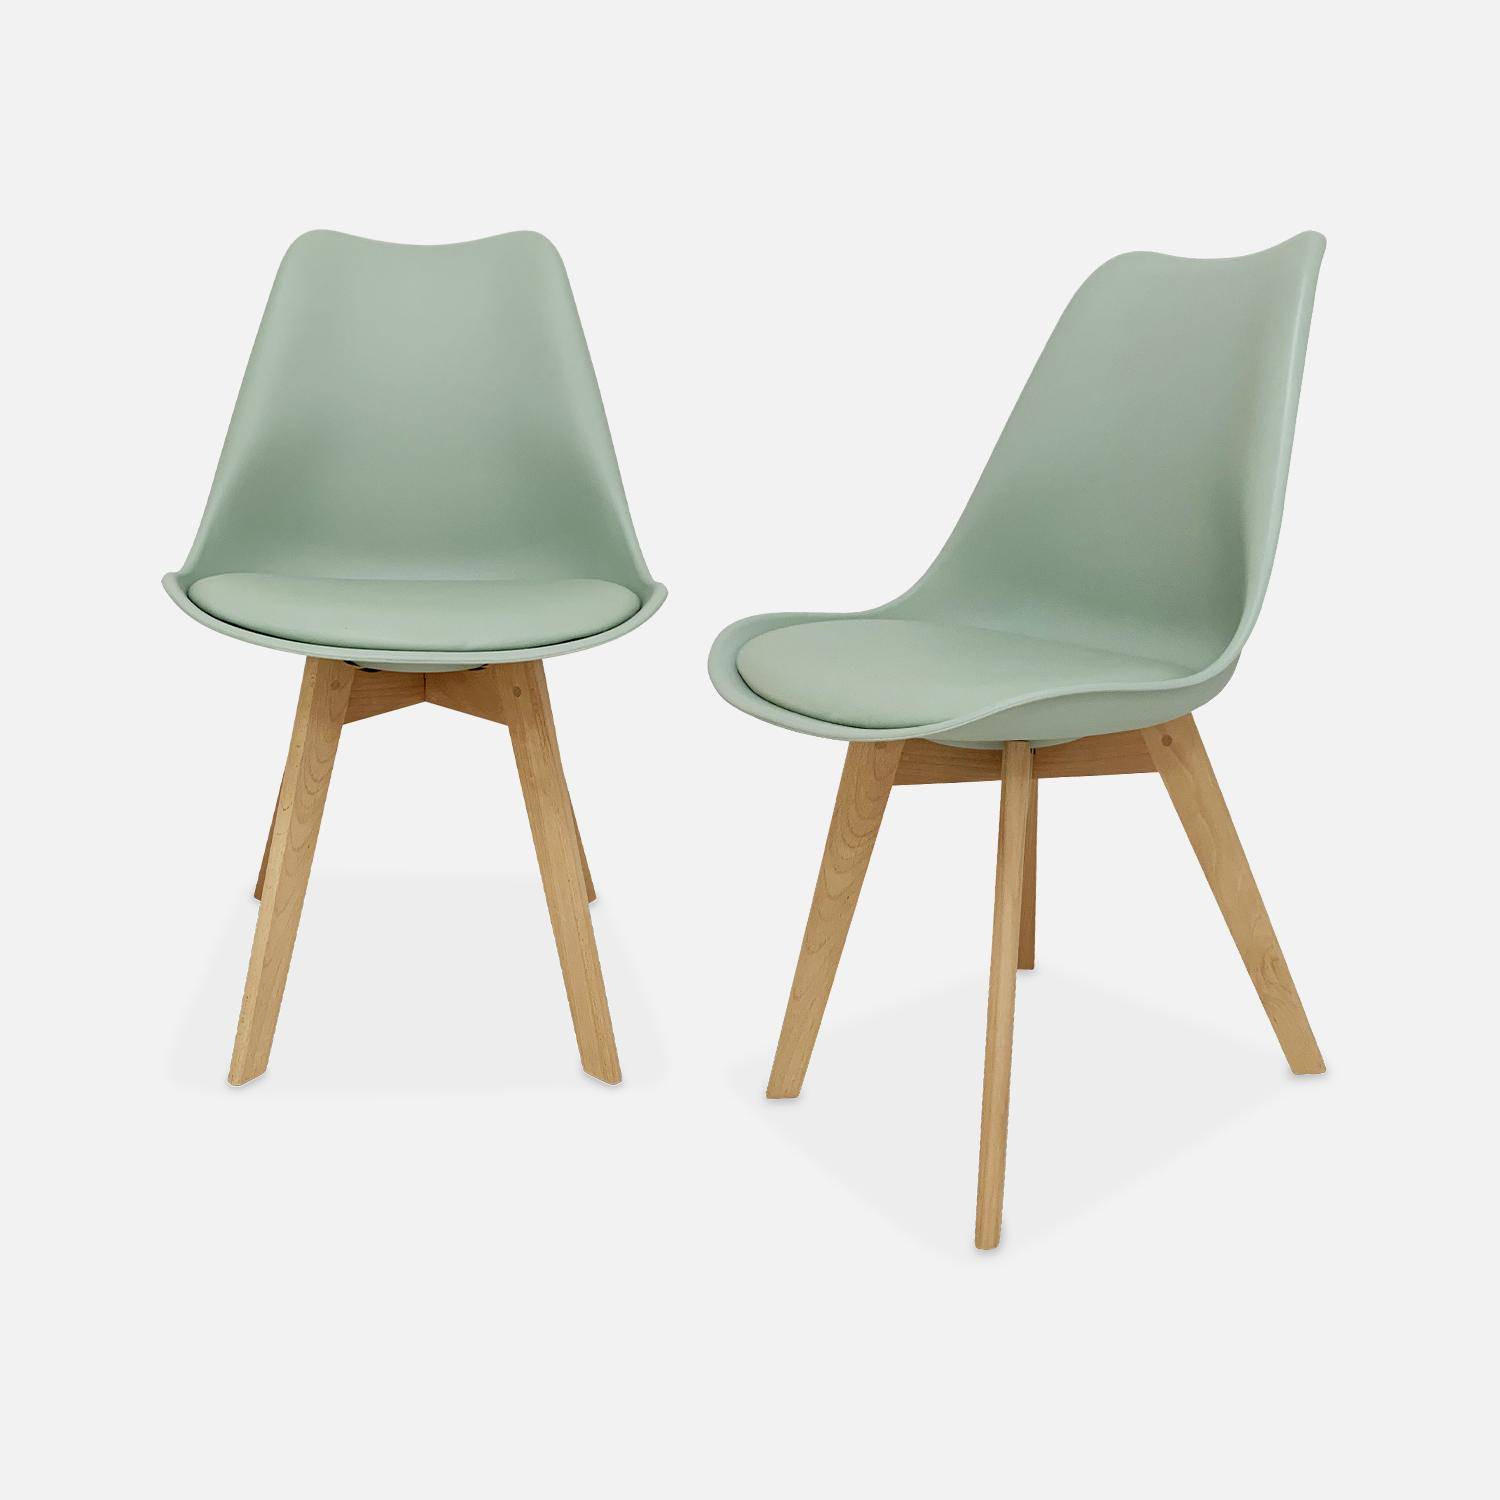 Pair of scandi-style dining chairs, green, L49xD55xH81cm, NILS,sweeek,Photo1